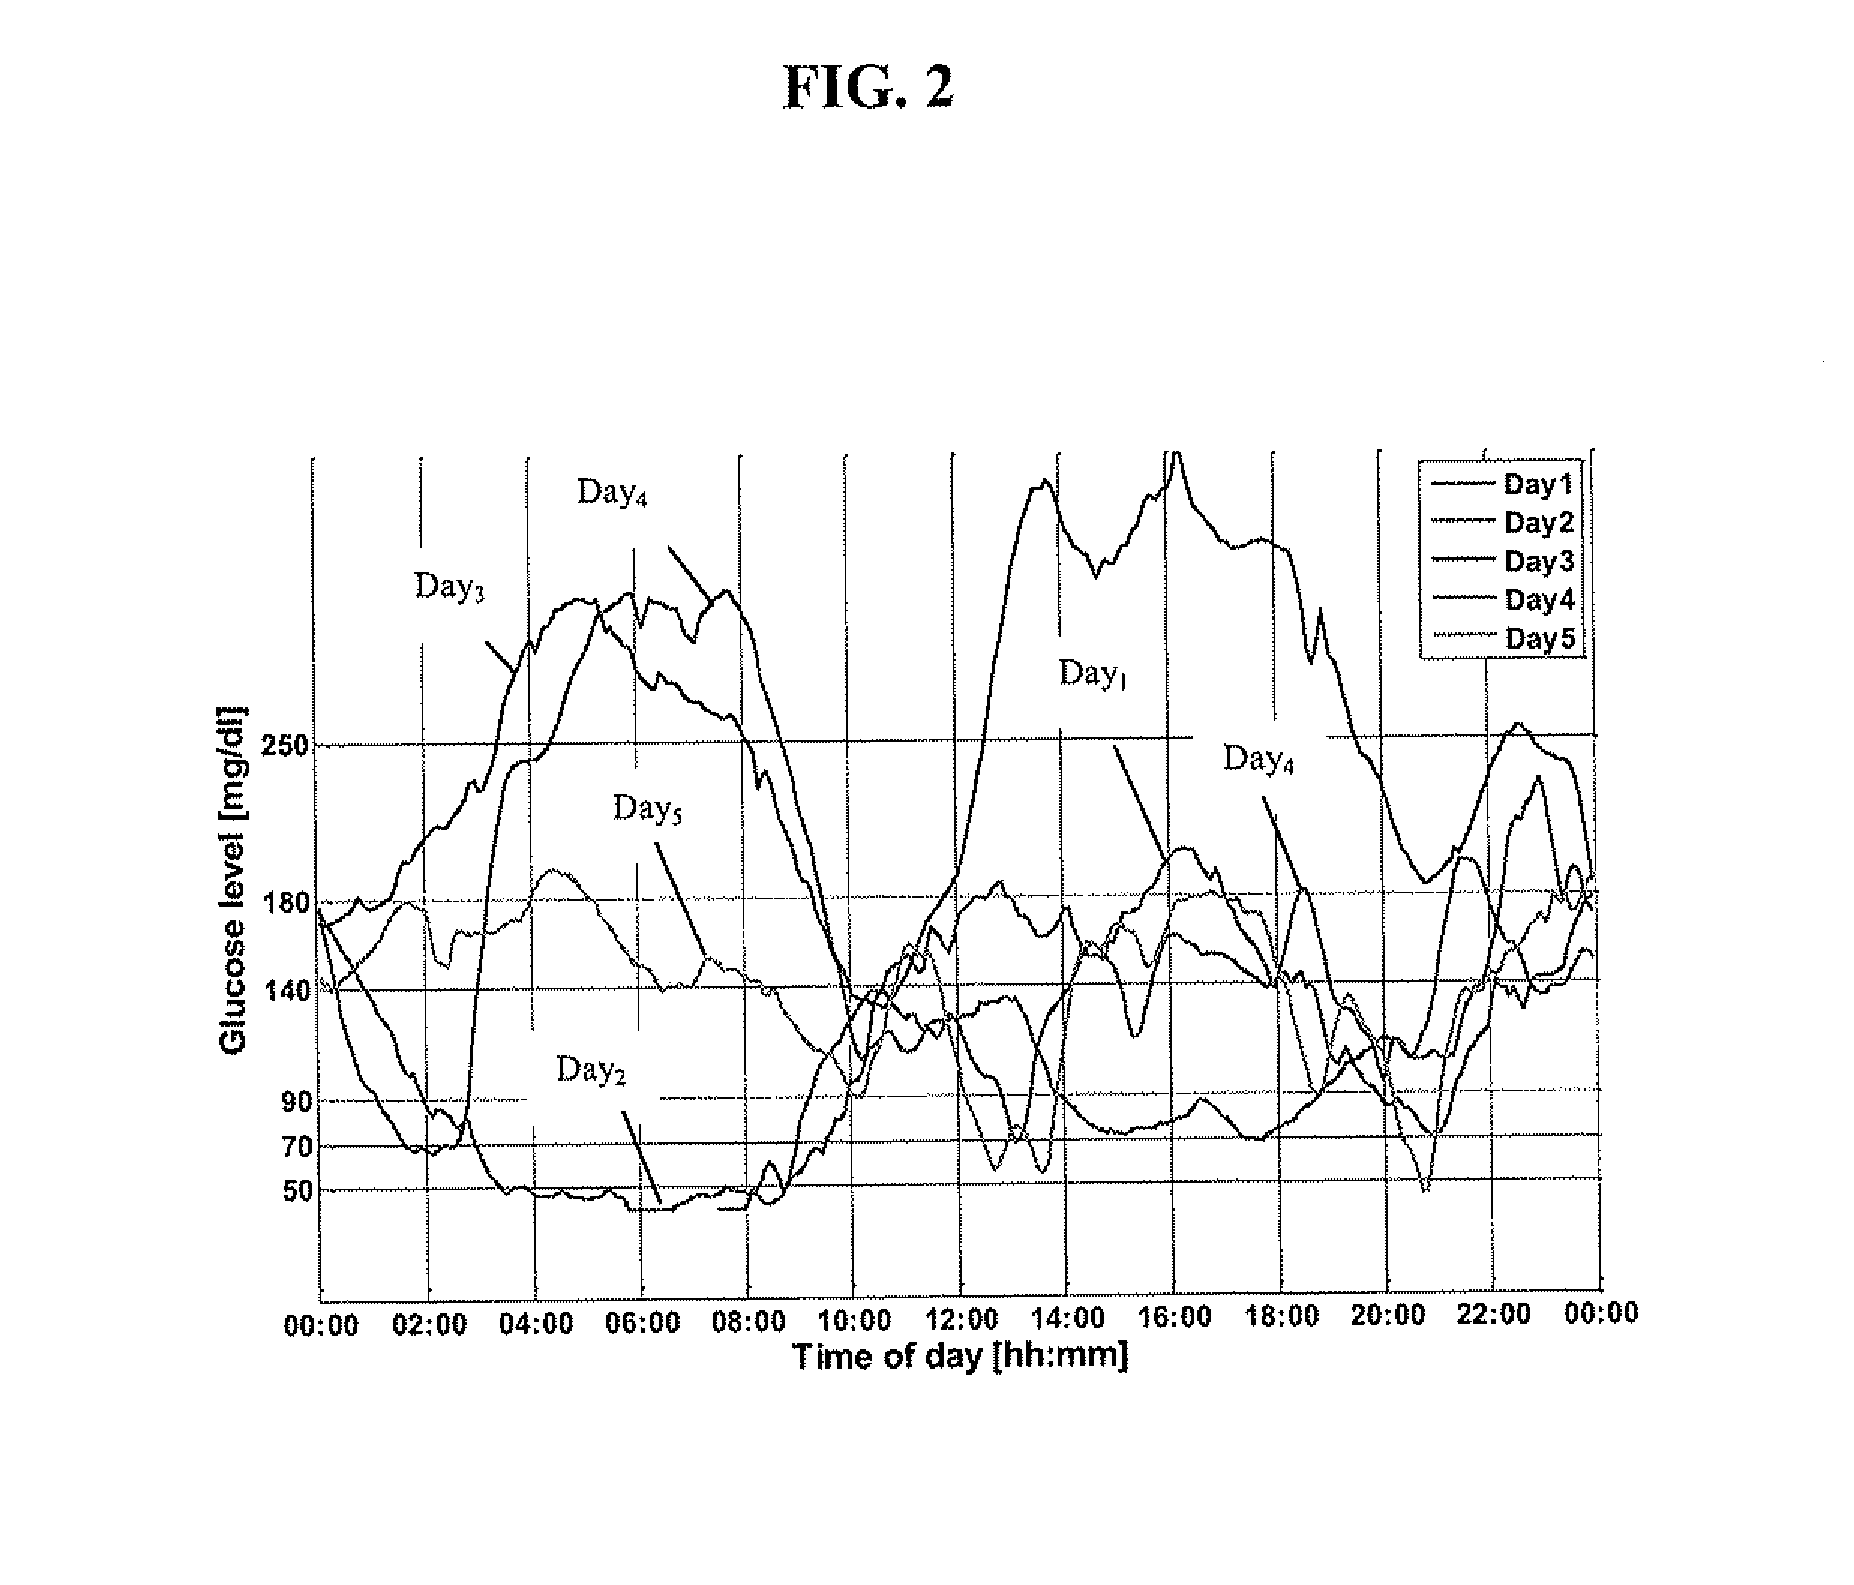 Monitoring device for management of insulin delivery